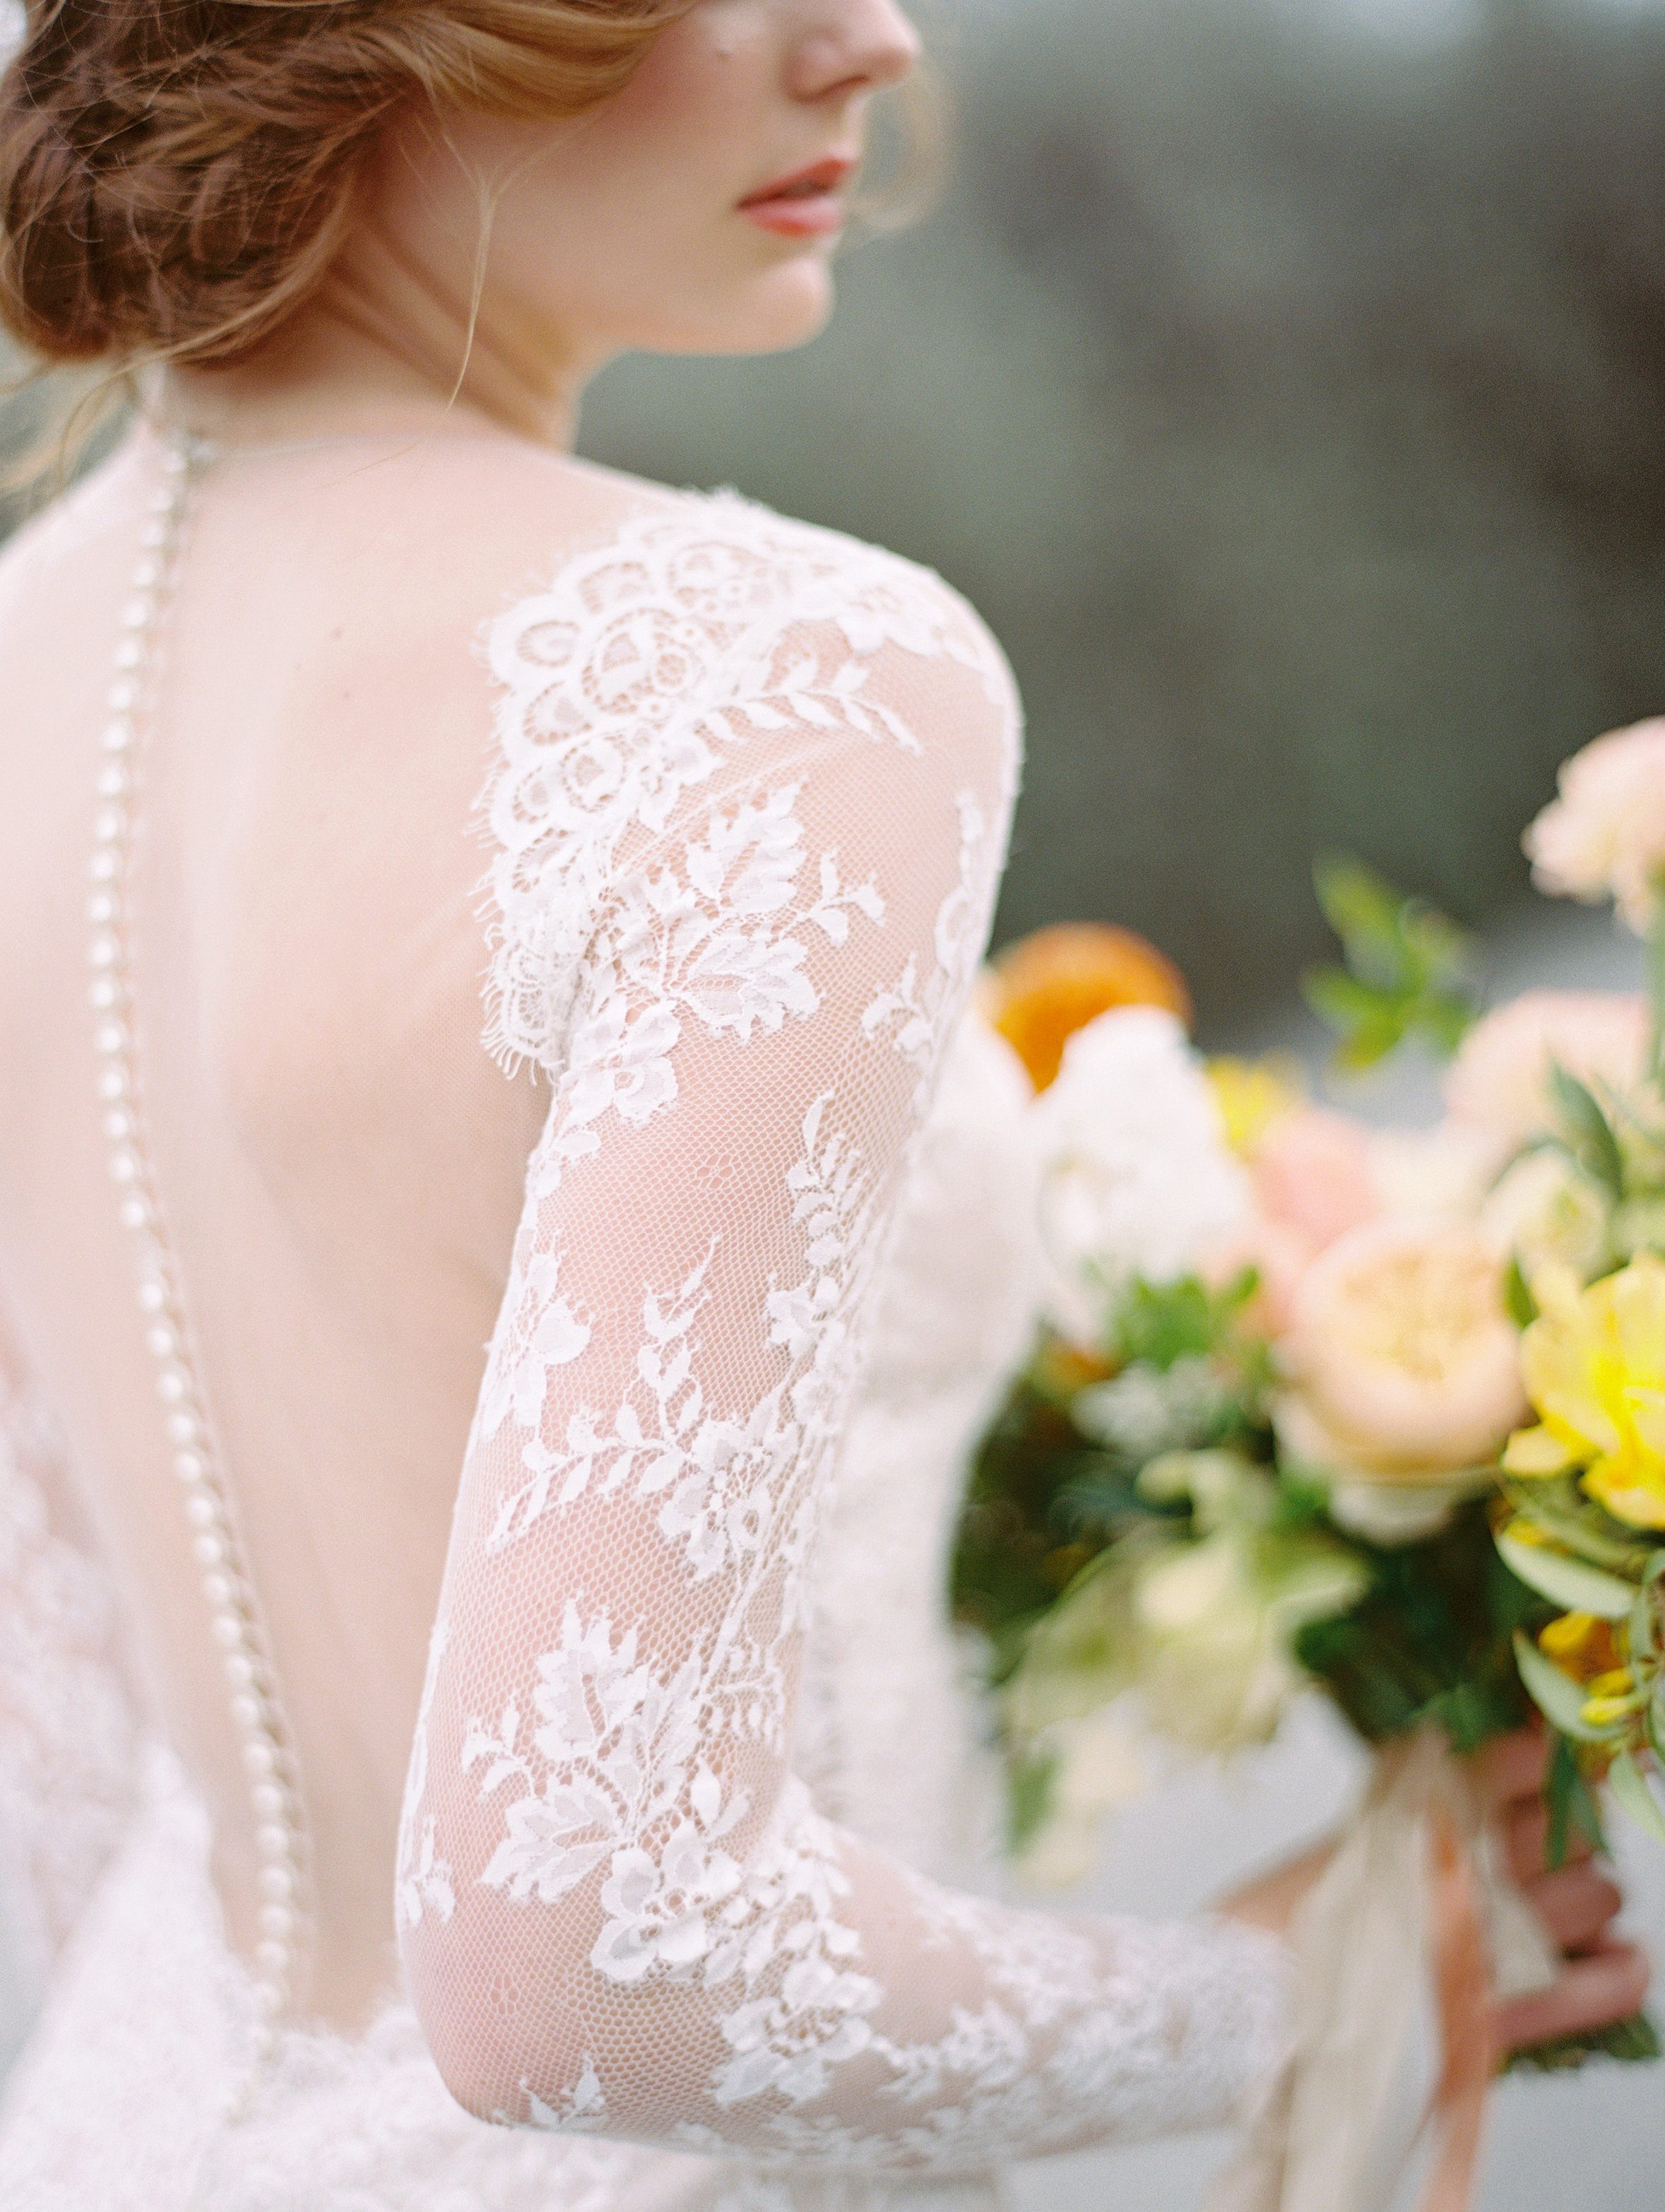 lace back bridal gown at a Belmont Hotel wedding